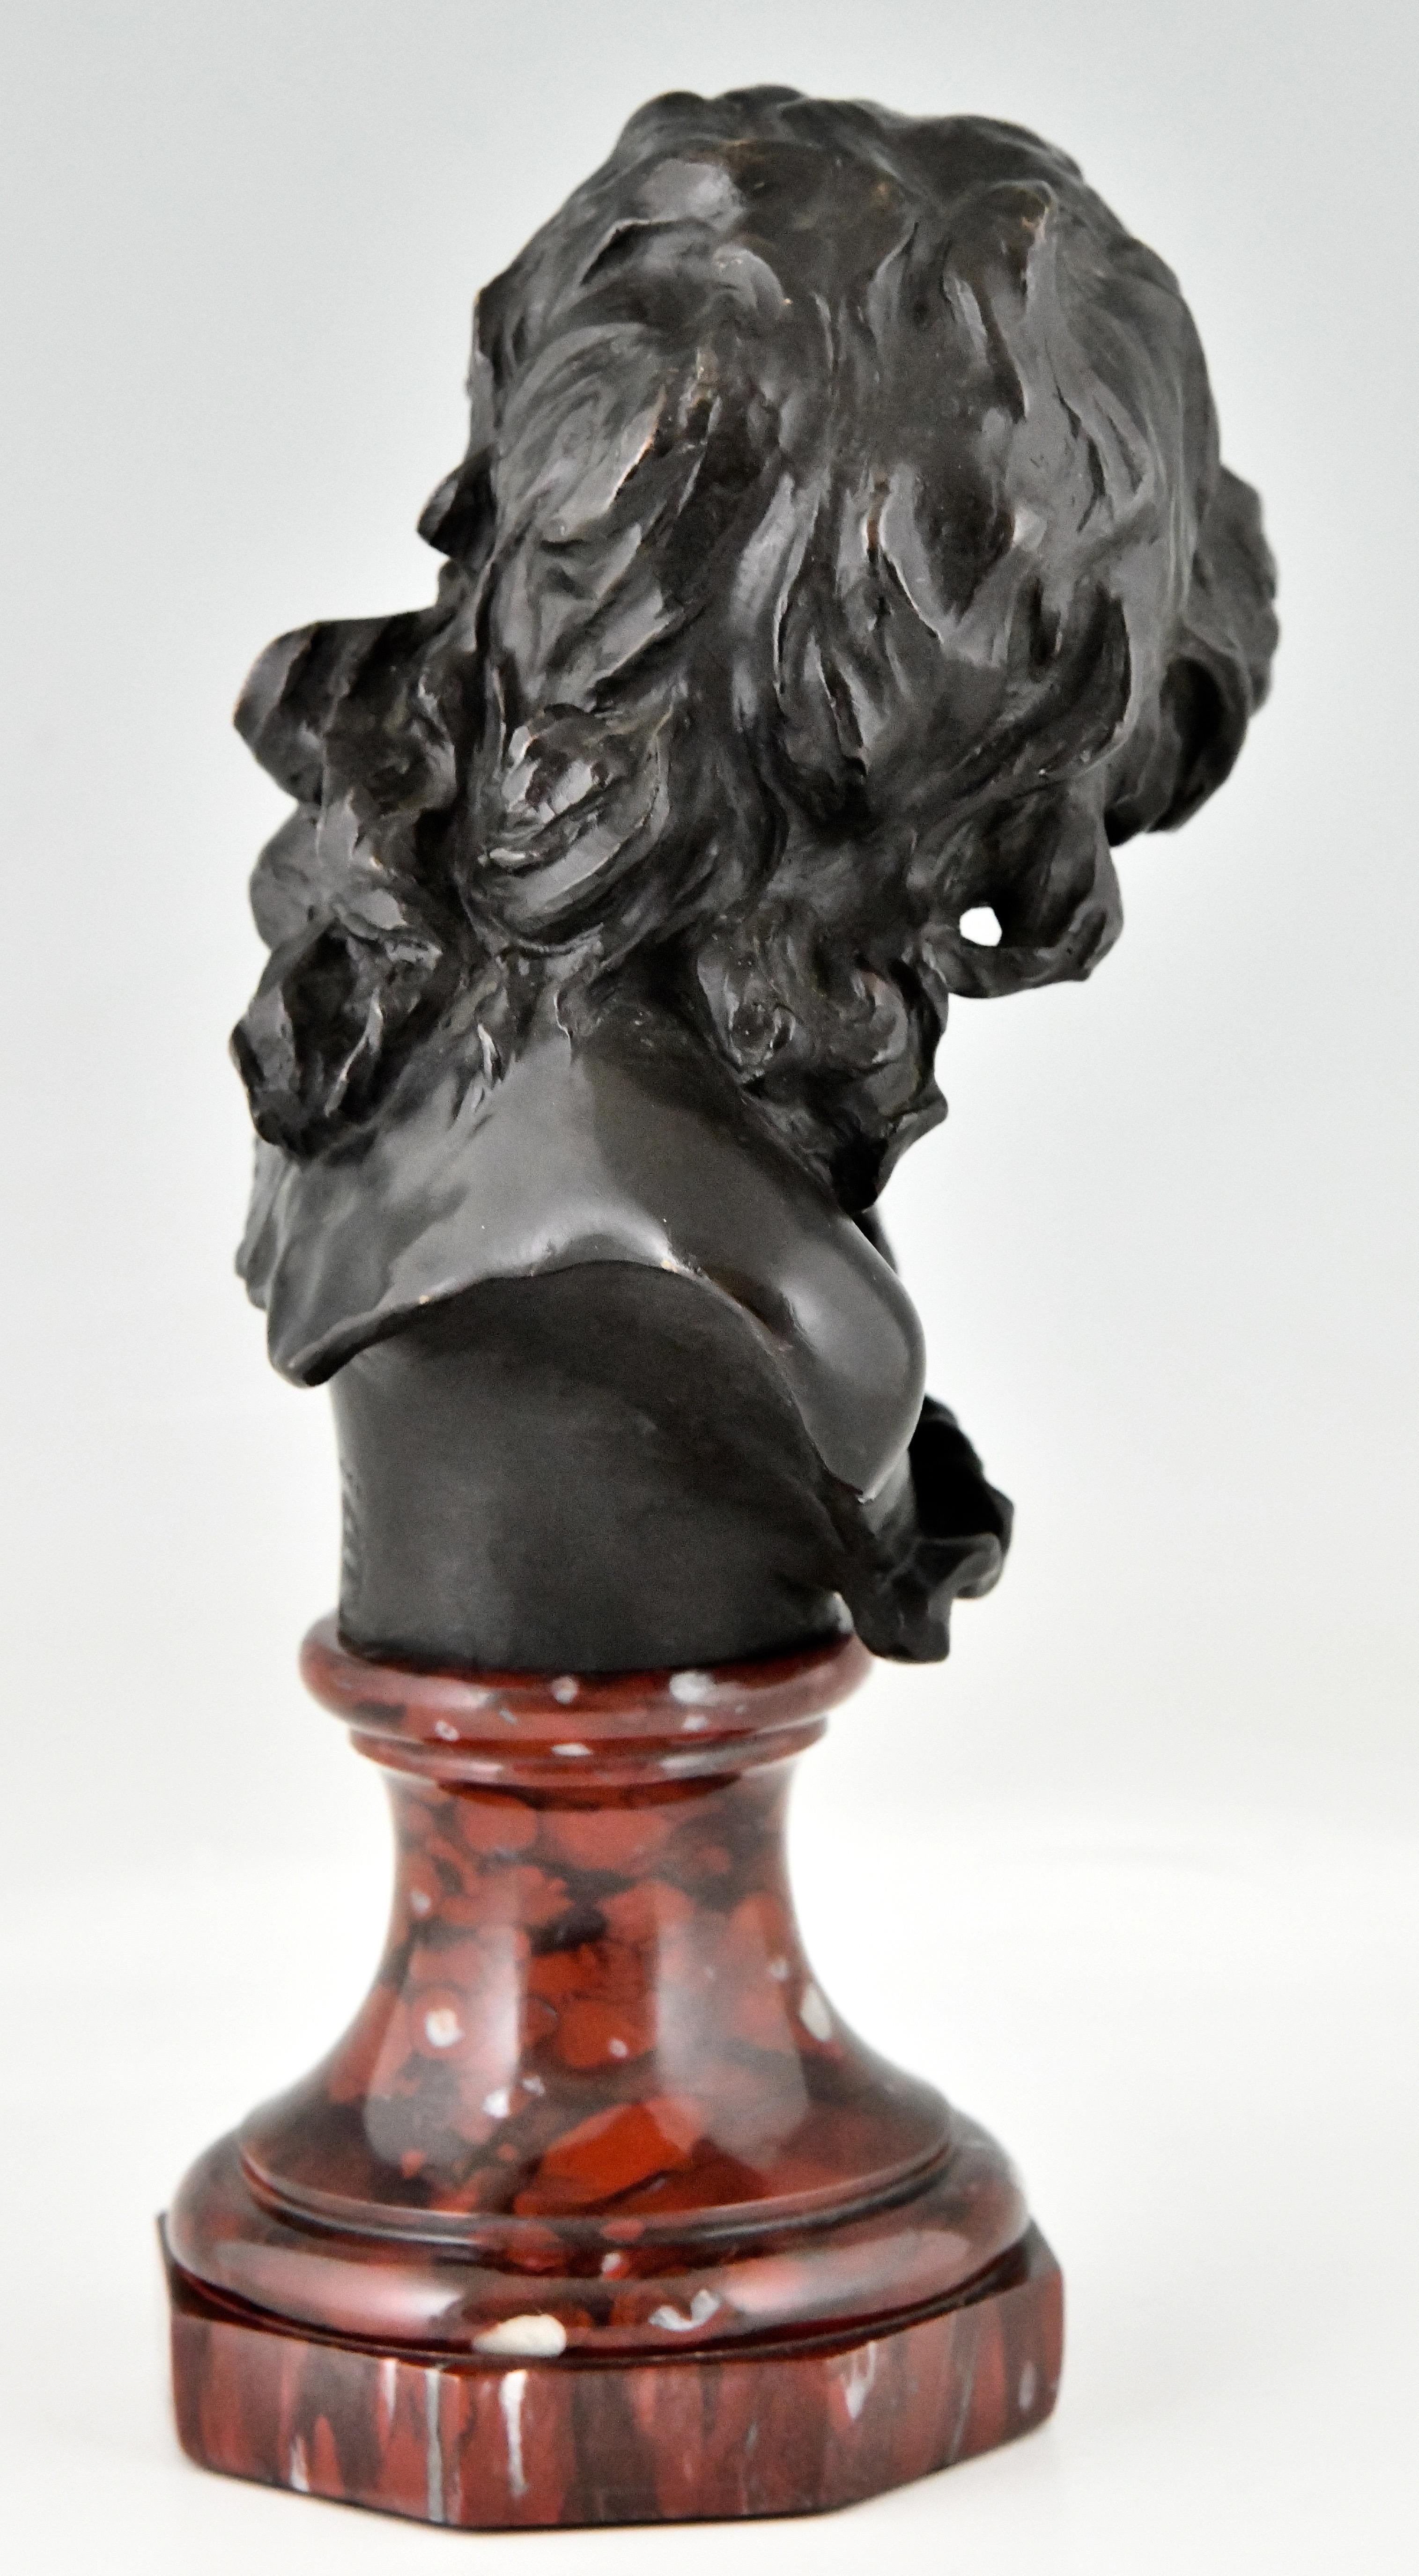 Patinated Antique Bronze Bust of a Smiling Child by Injalbert Foundry Mark Siot France 190 For Sale